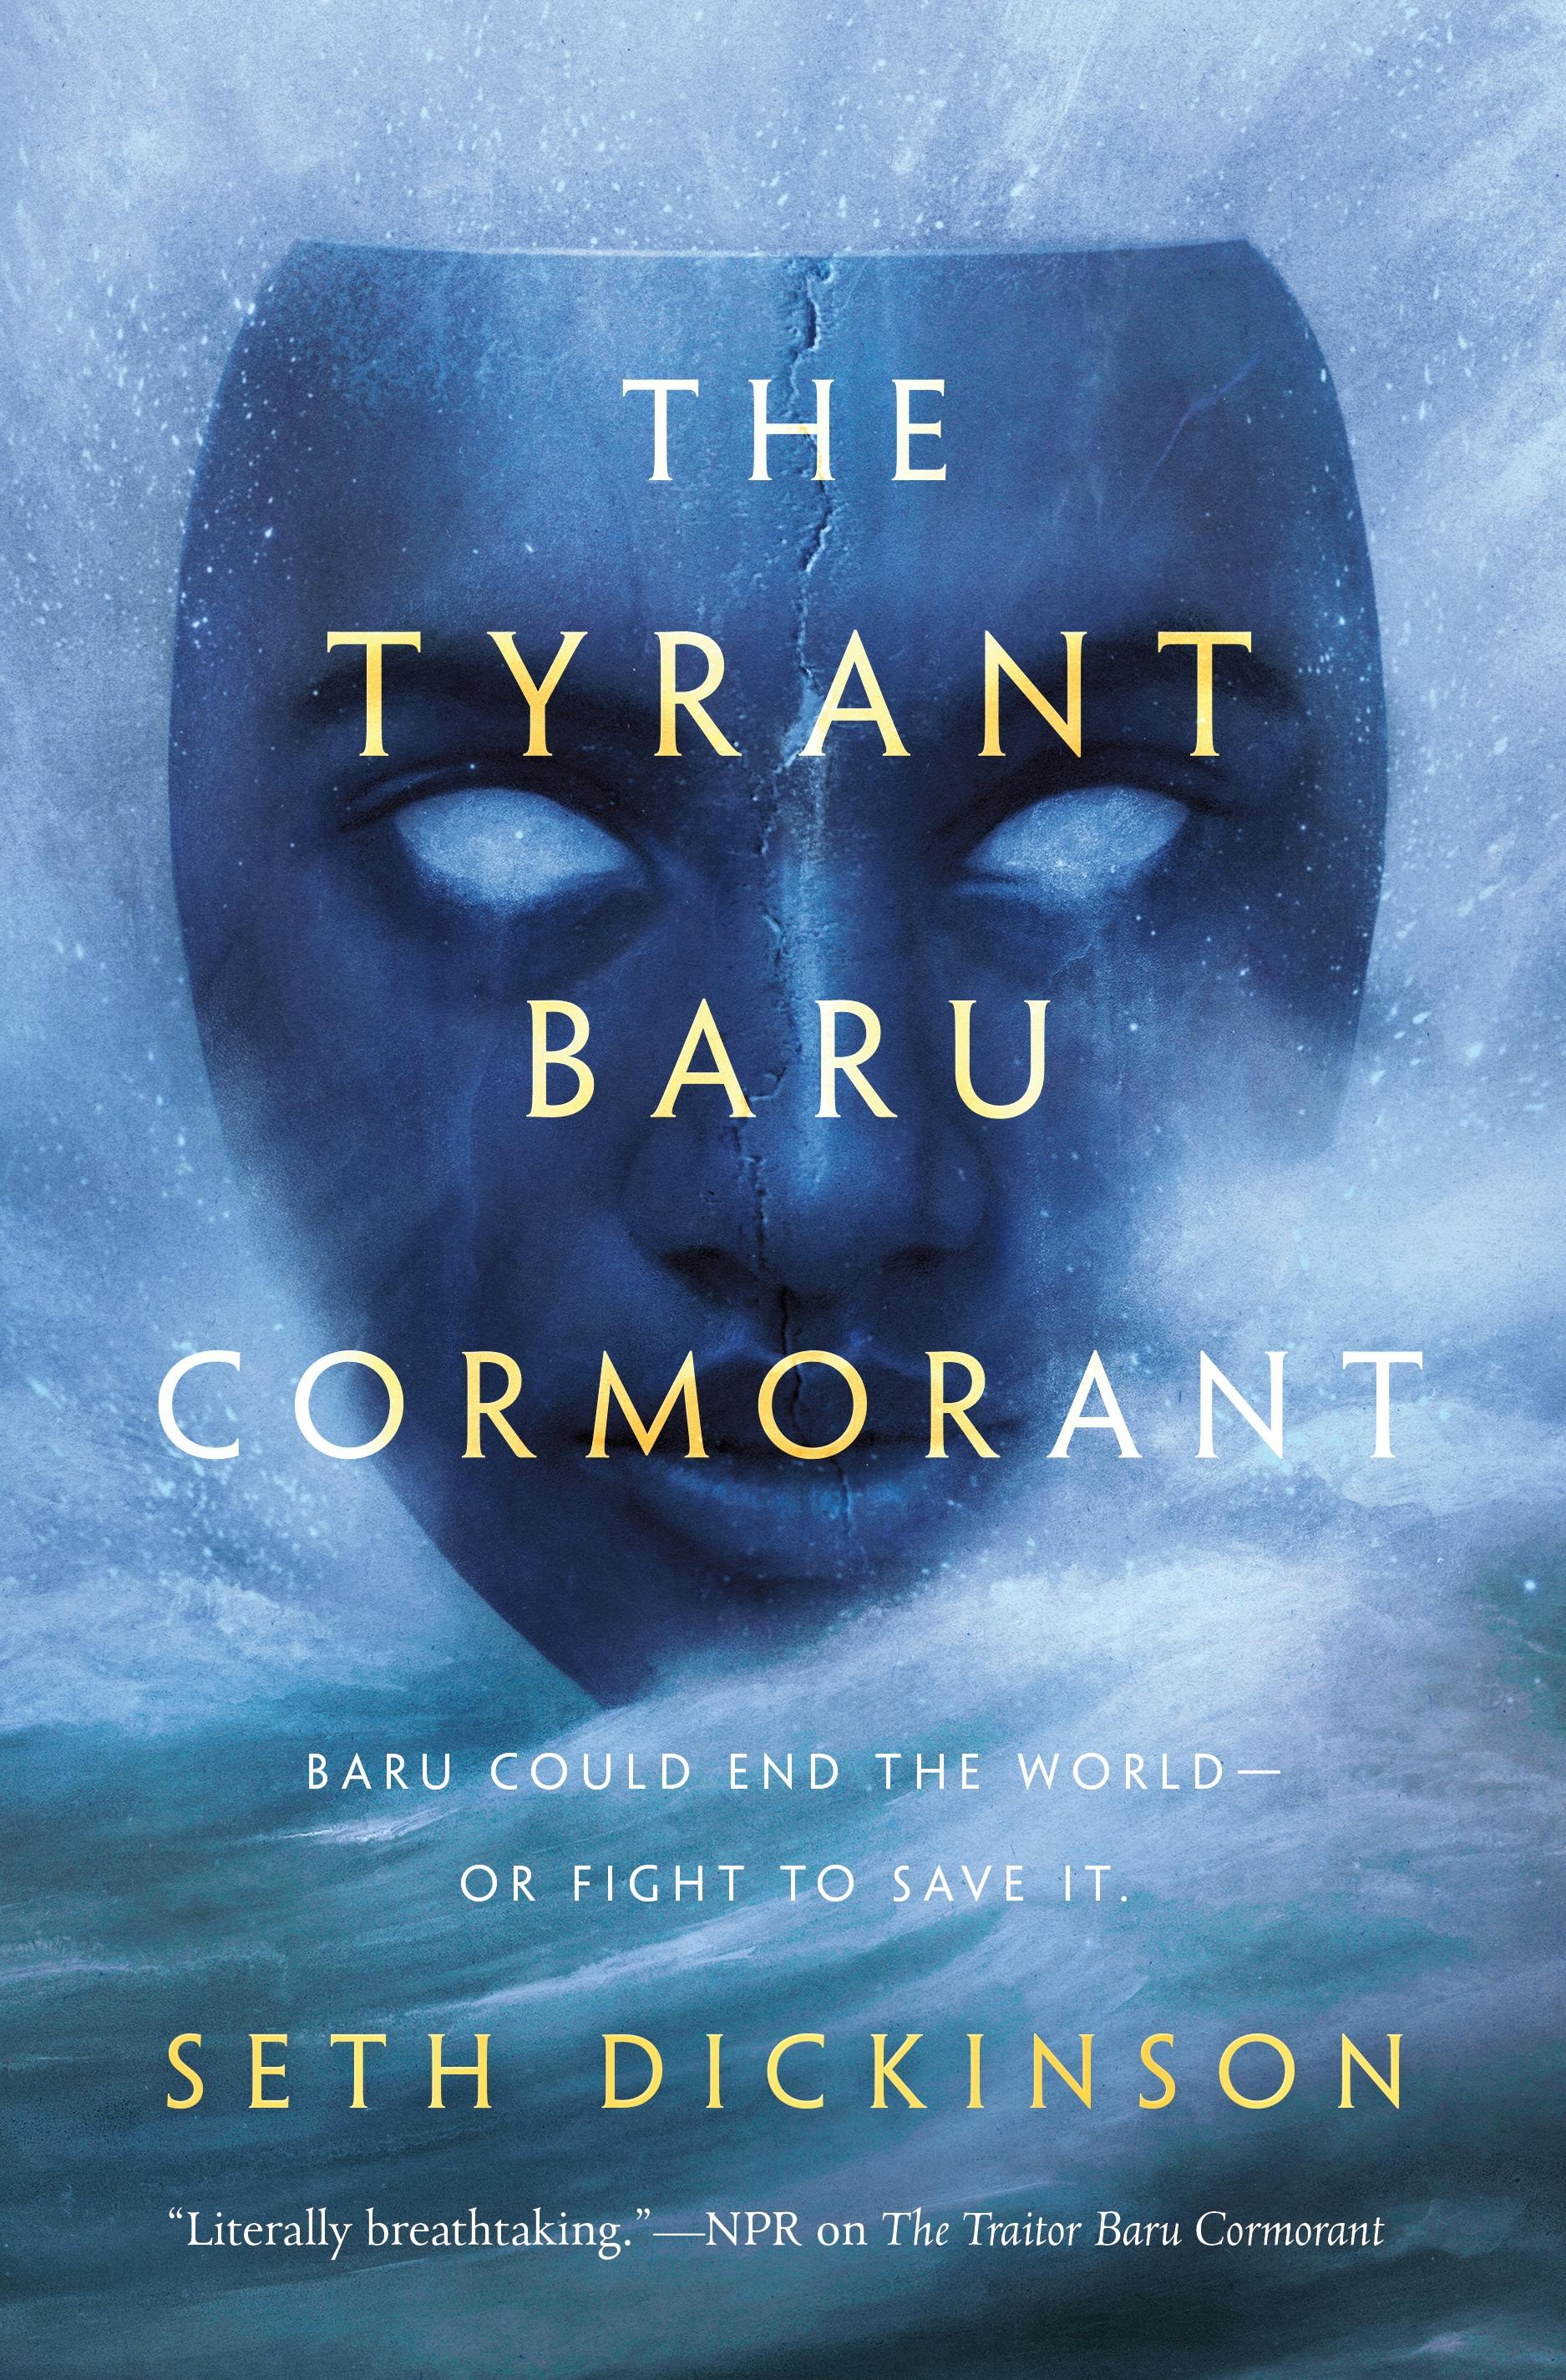 Cover for the book titled as: The Tyrant Baru Cormorant